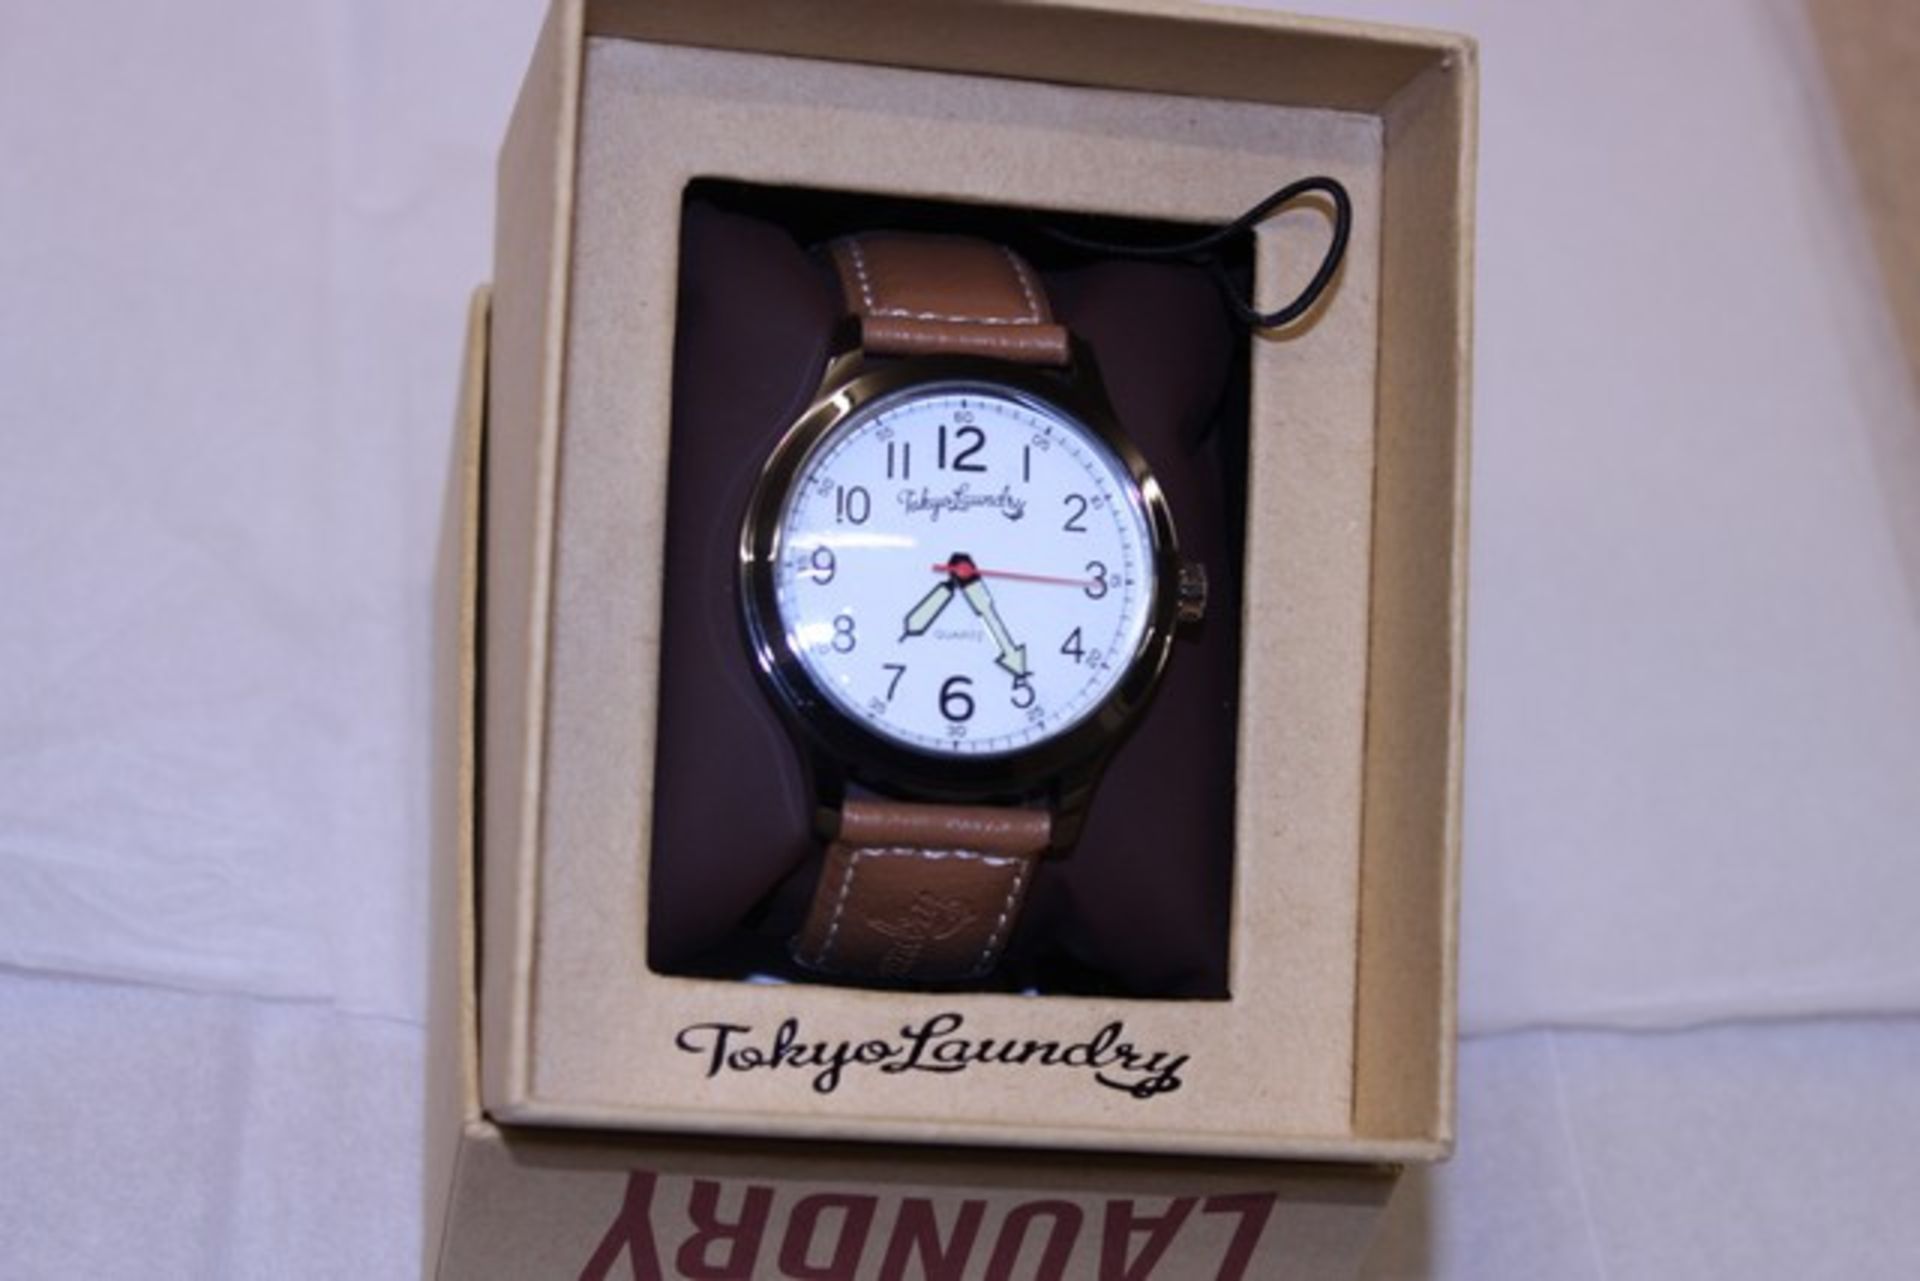 V Brand New Gents Tokyo Laundry Brown Strap White Face Analogue Watch - RRP £49.99